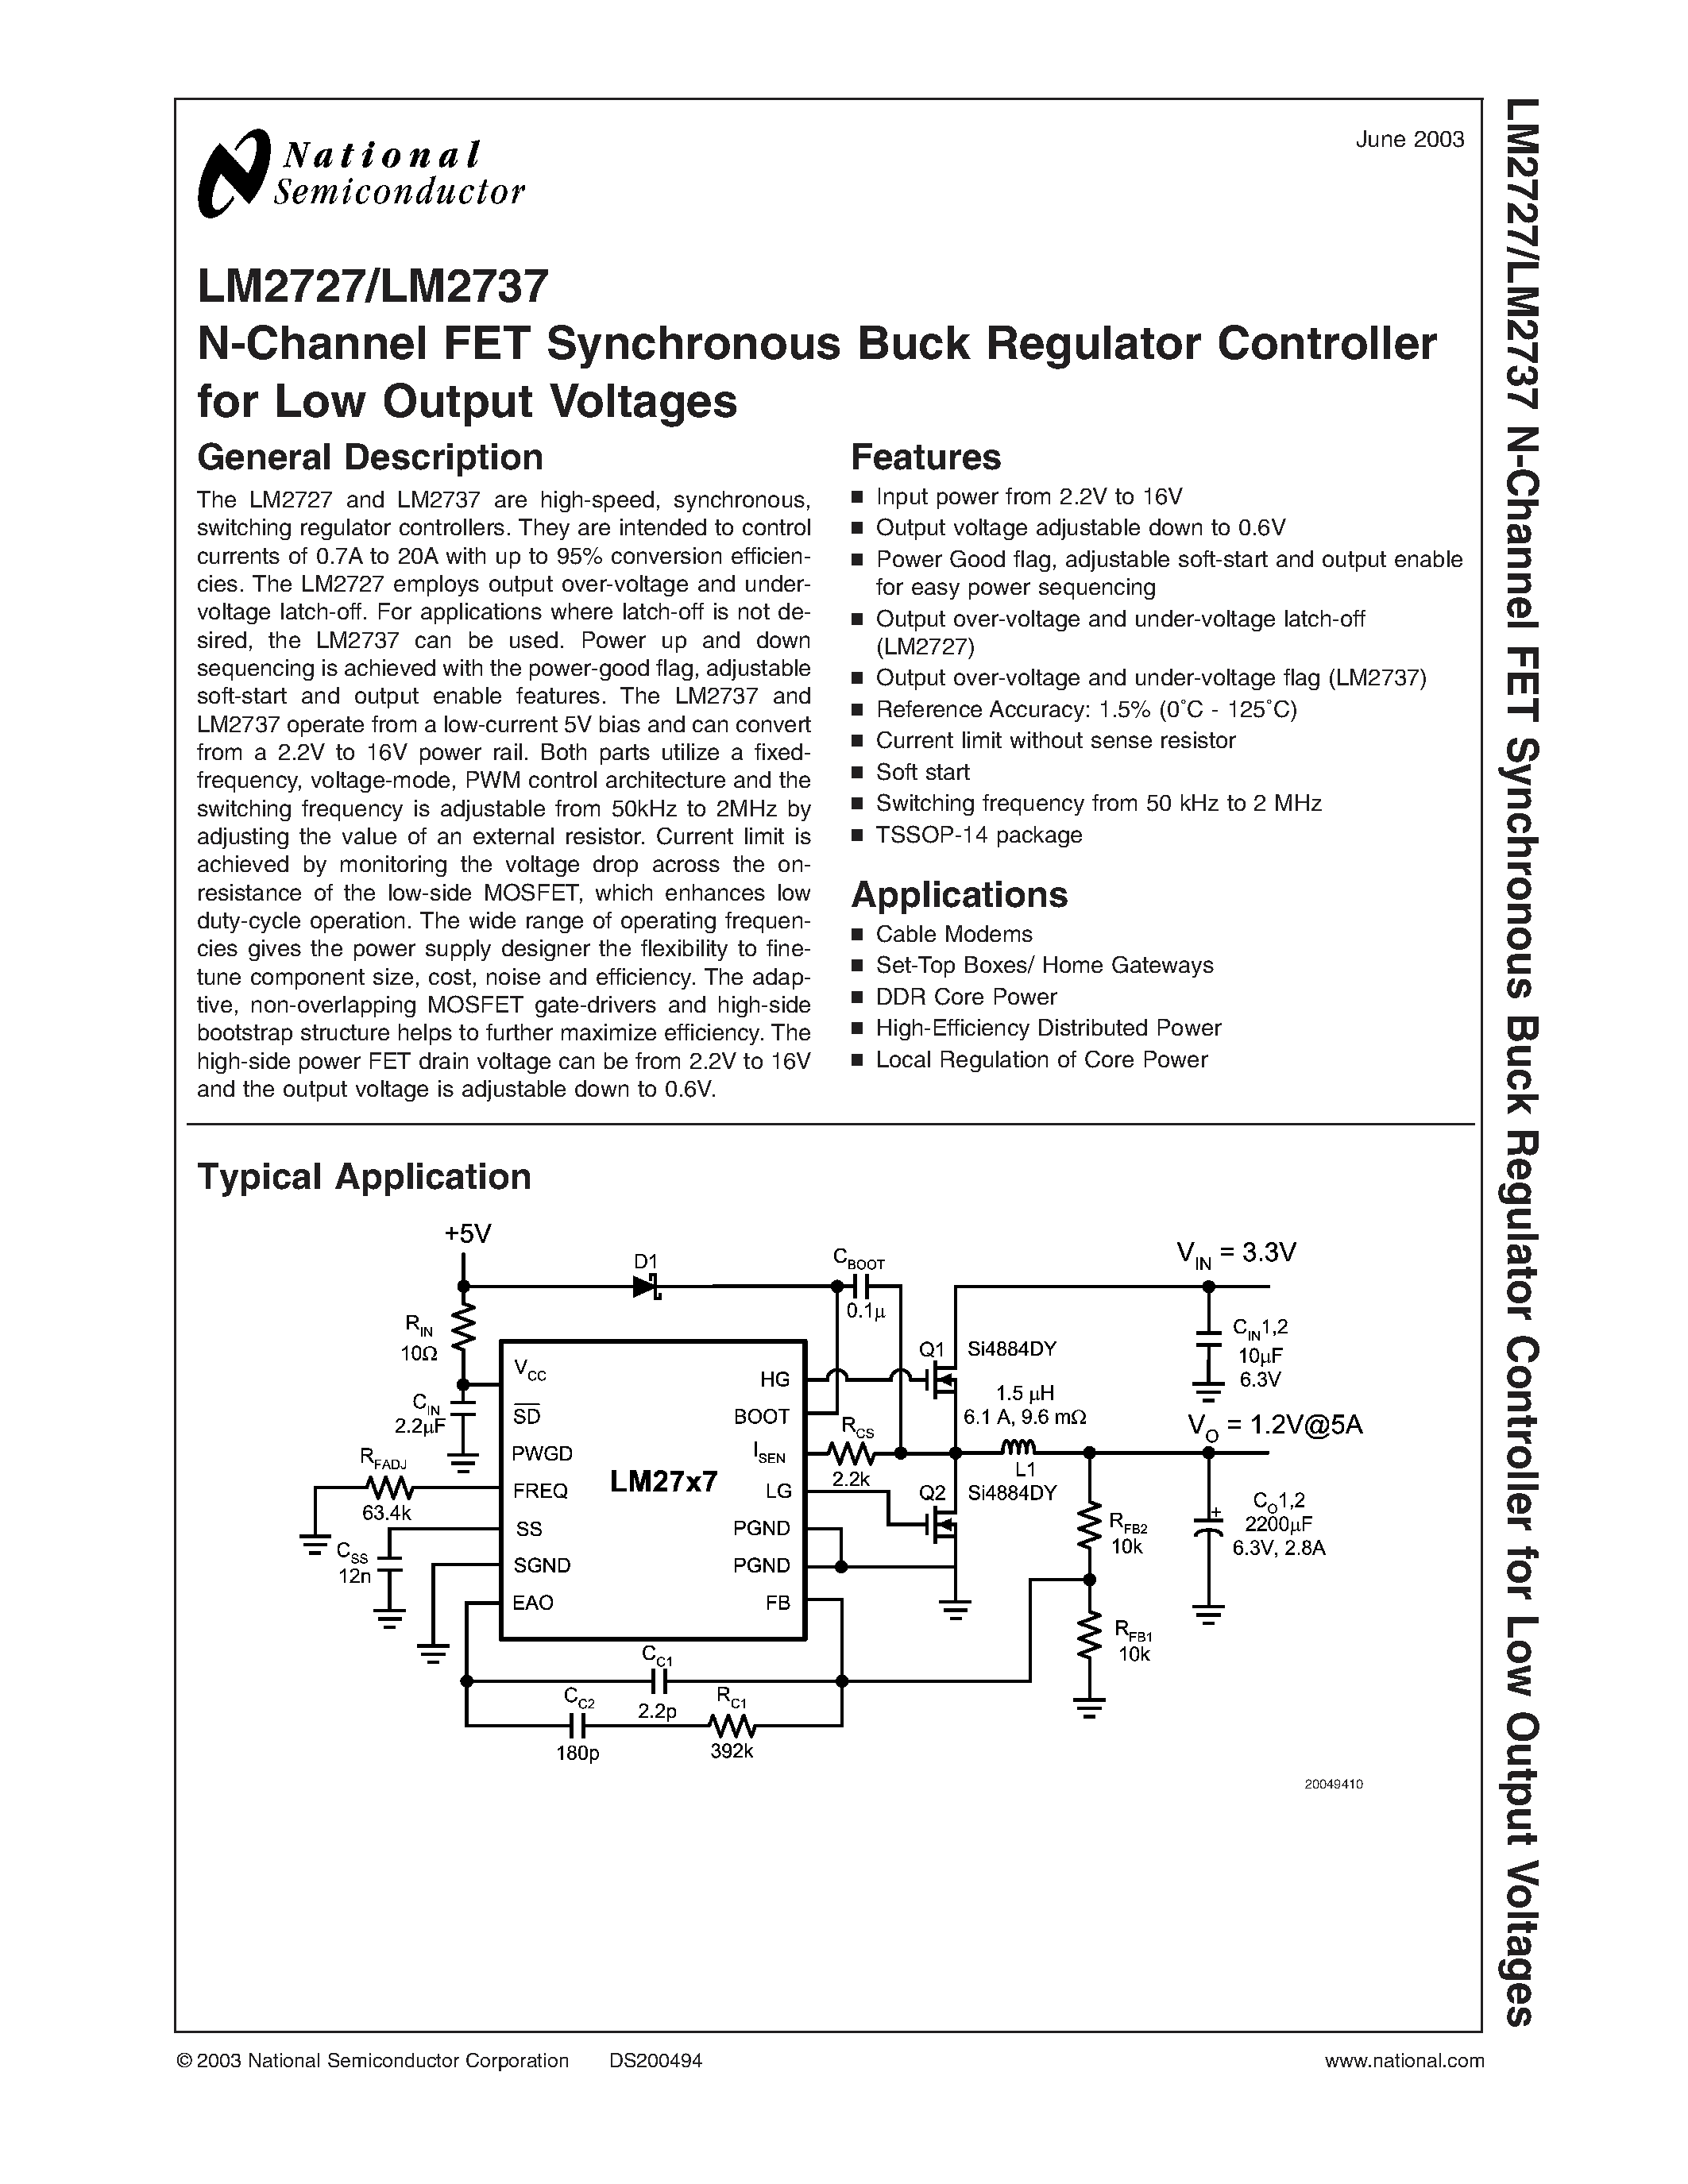 Datasheet BAT-54 - N-Channel FET Synchronous Buck Regulator Controller for Low Output Voltages page 1